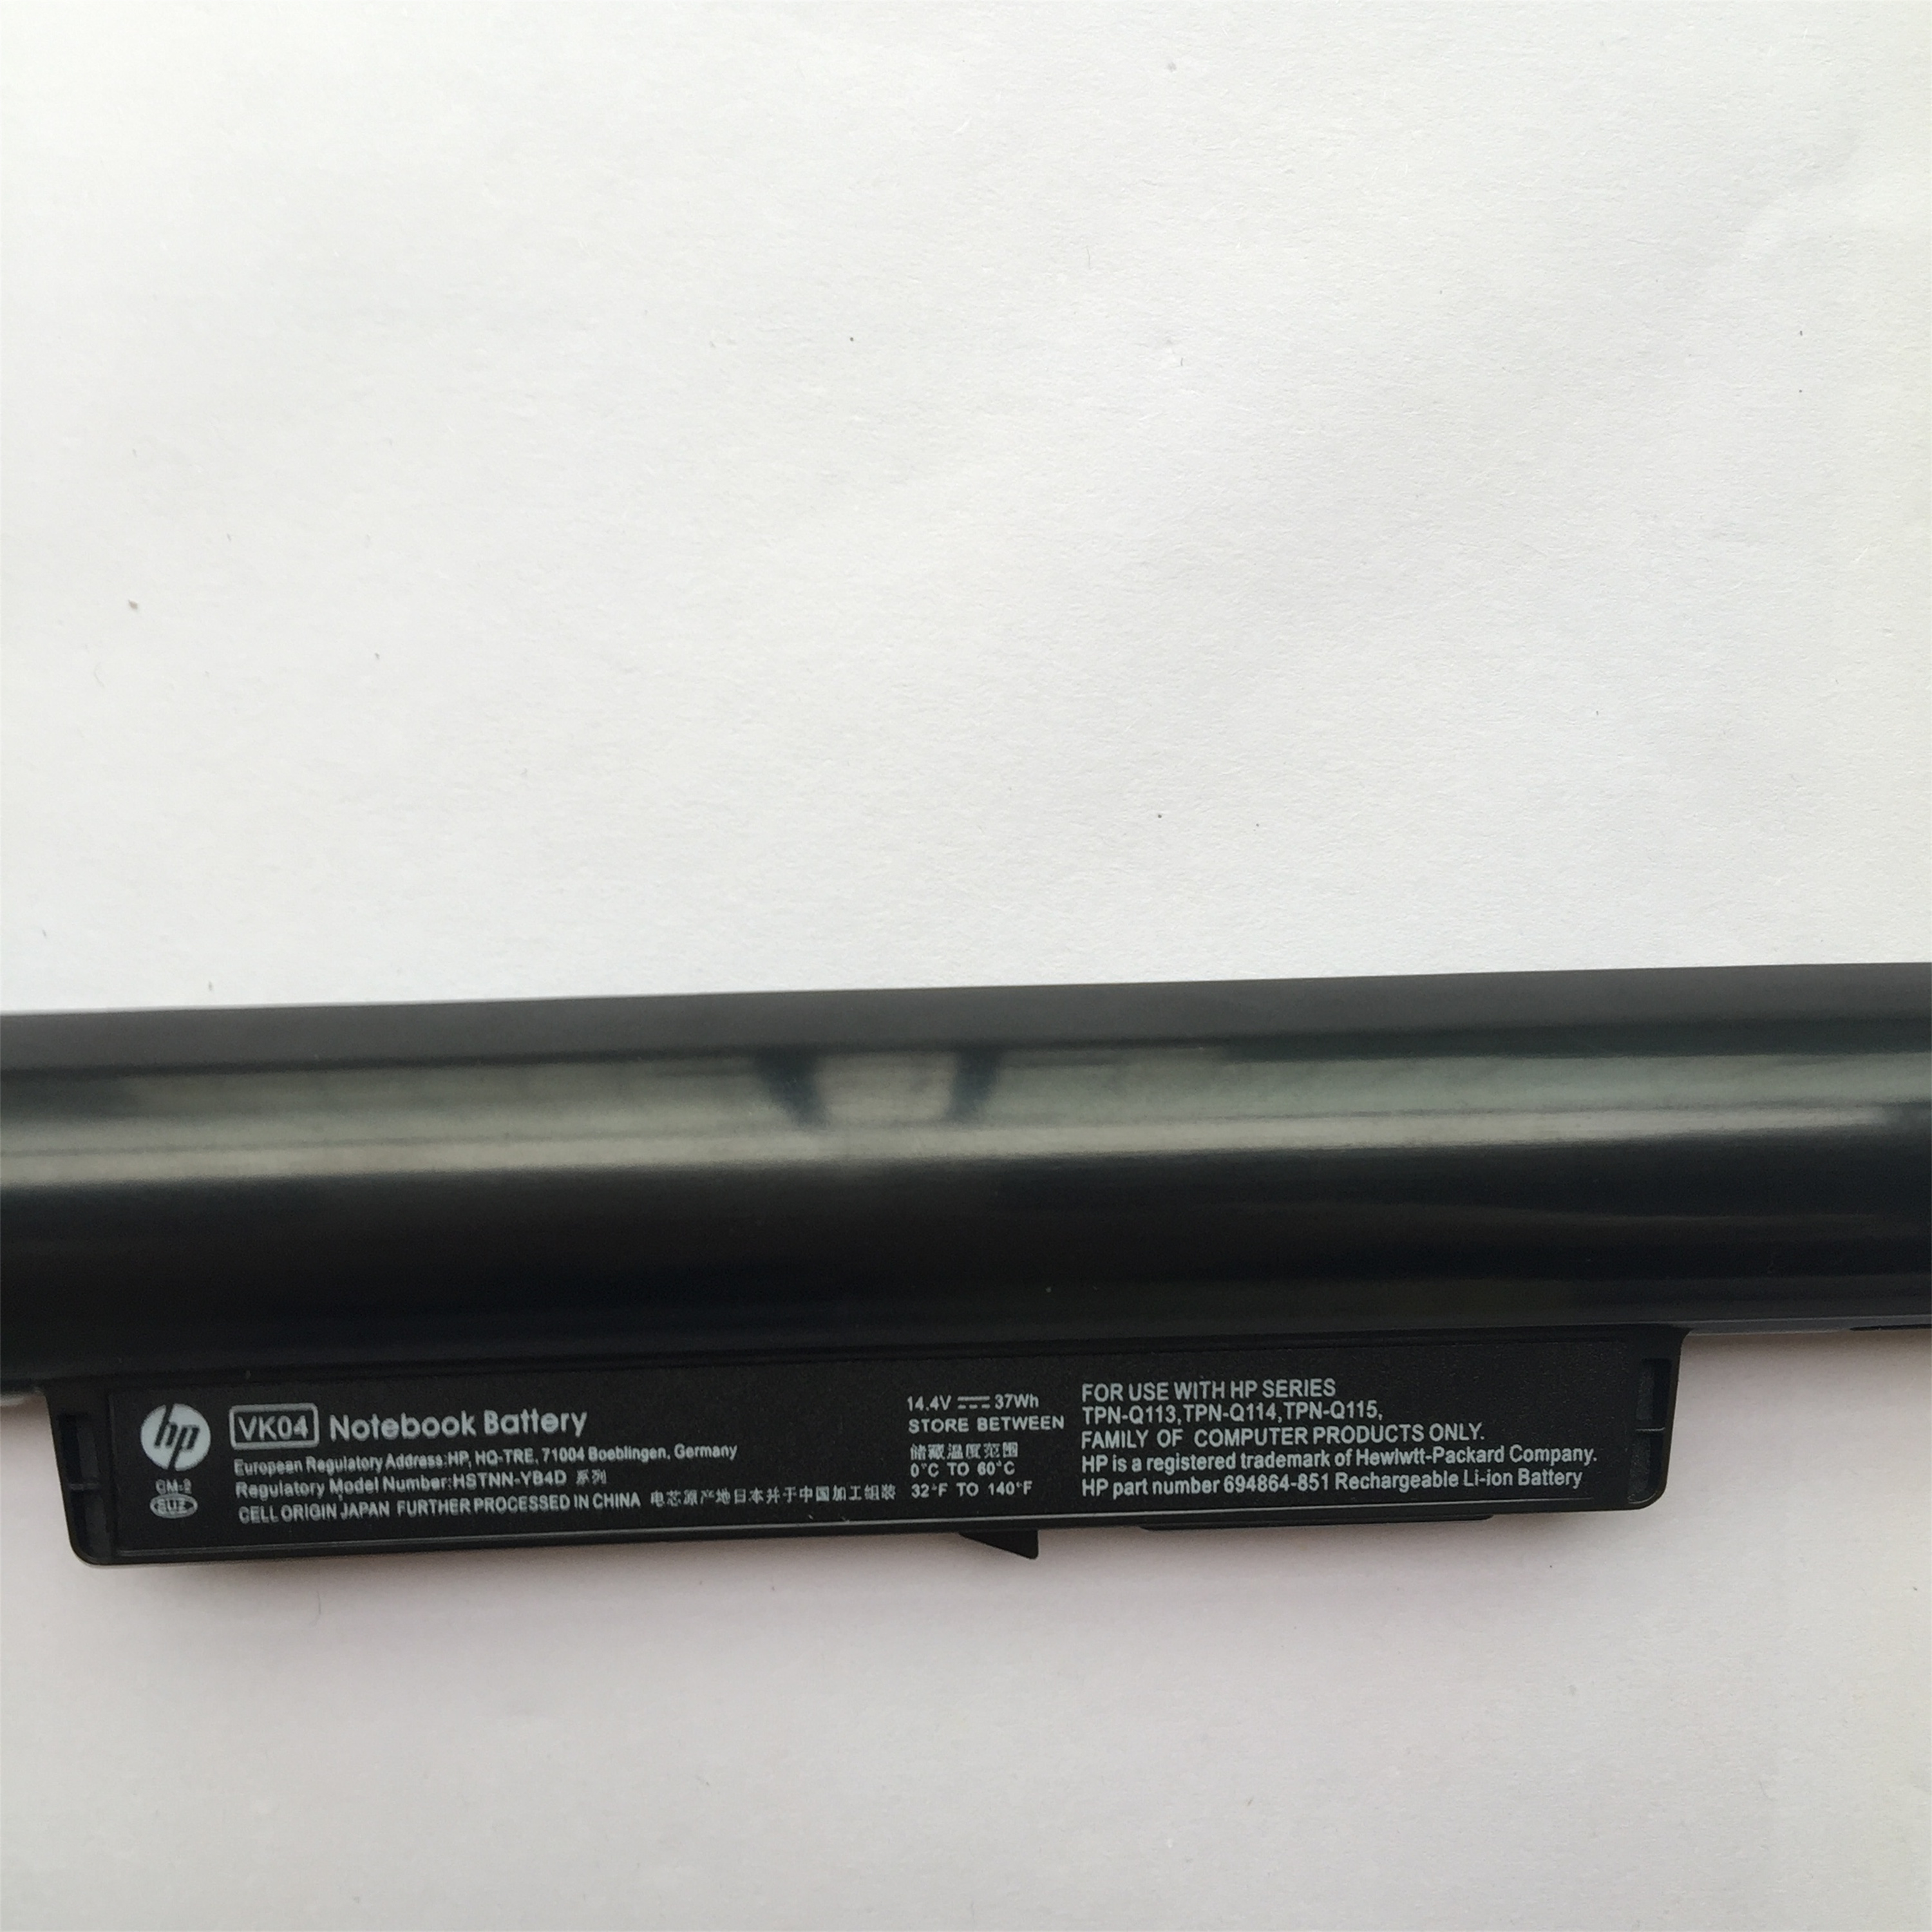 VK04 rechargeable lithium ion Notebook battery Laptop battery For Hp Pavilion 14 15 M4 242 G1 G2 VK04 HSTNN-YB4D 695192-001 TPN-Q115/Q113/Q114 14.4V 37WH